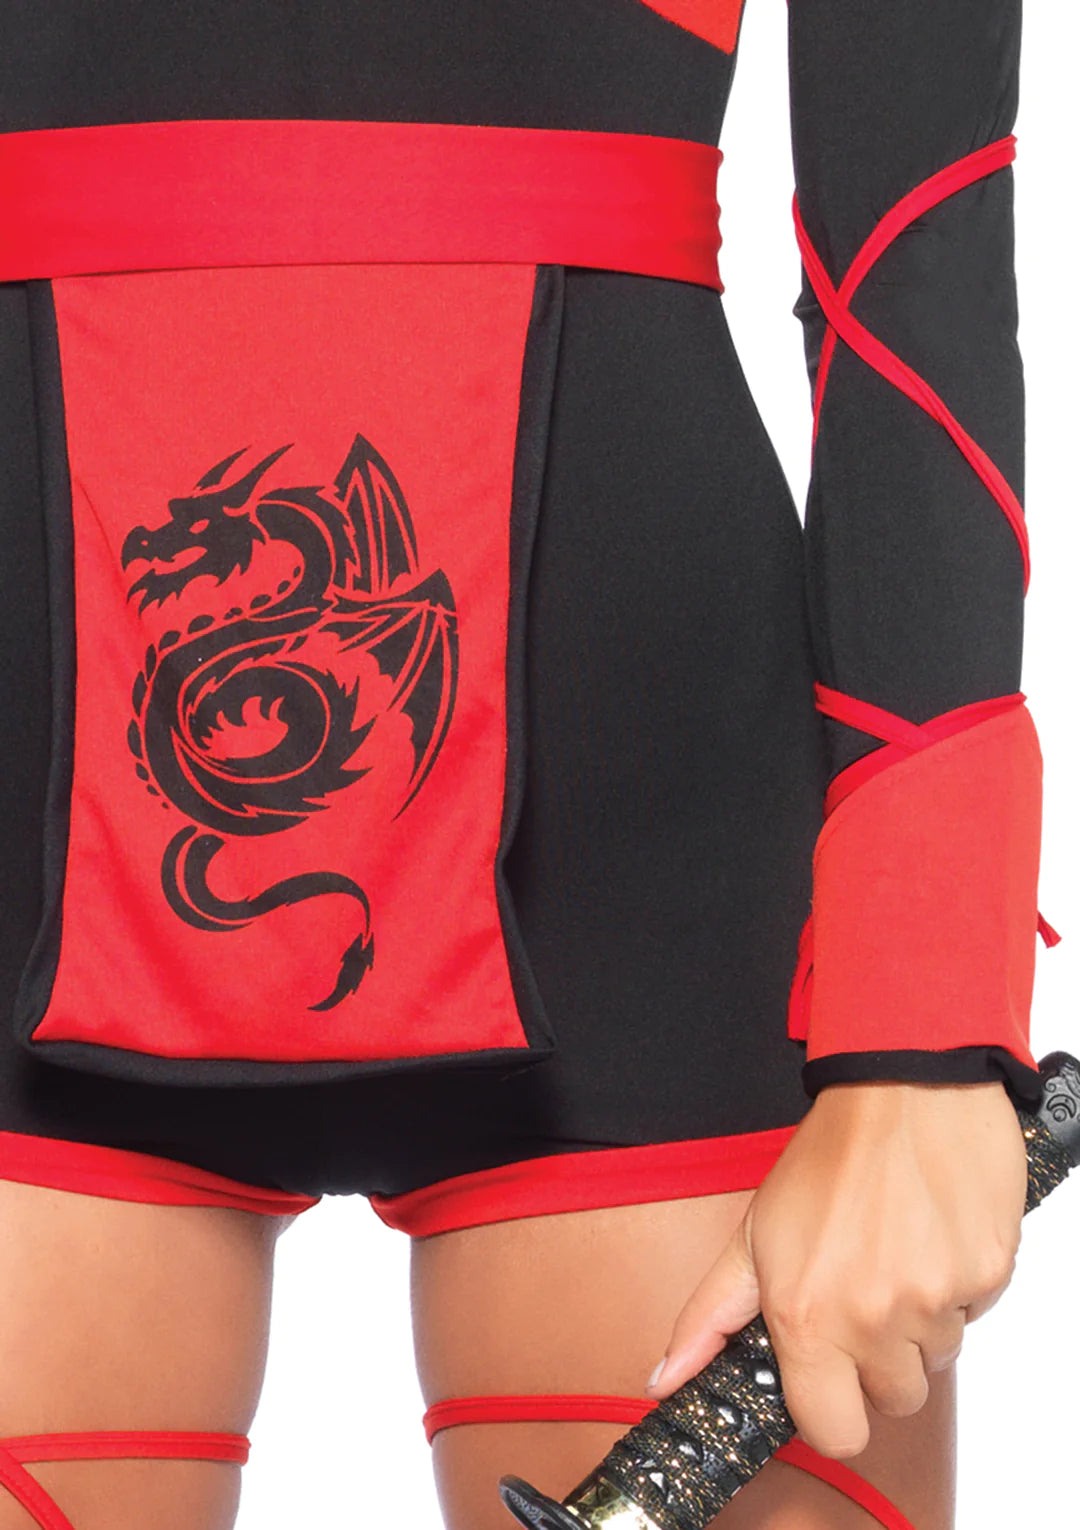 Sexy Deadly Ninja Costume for Women